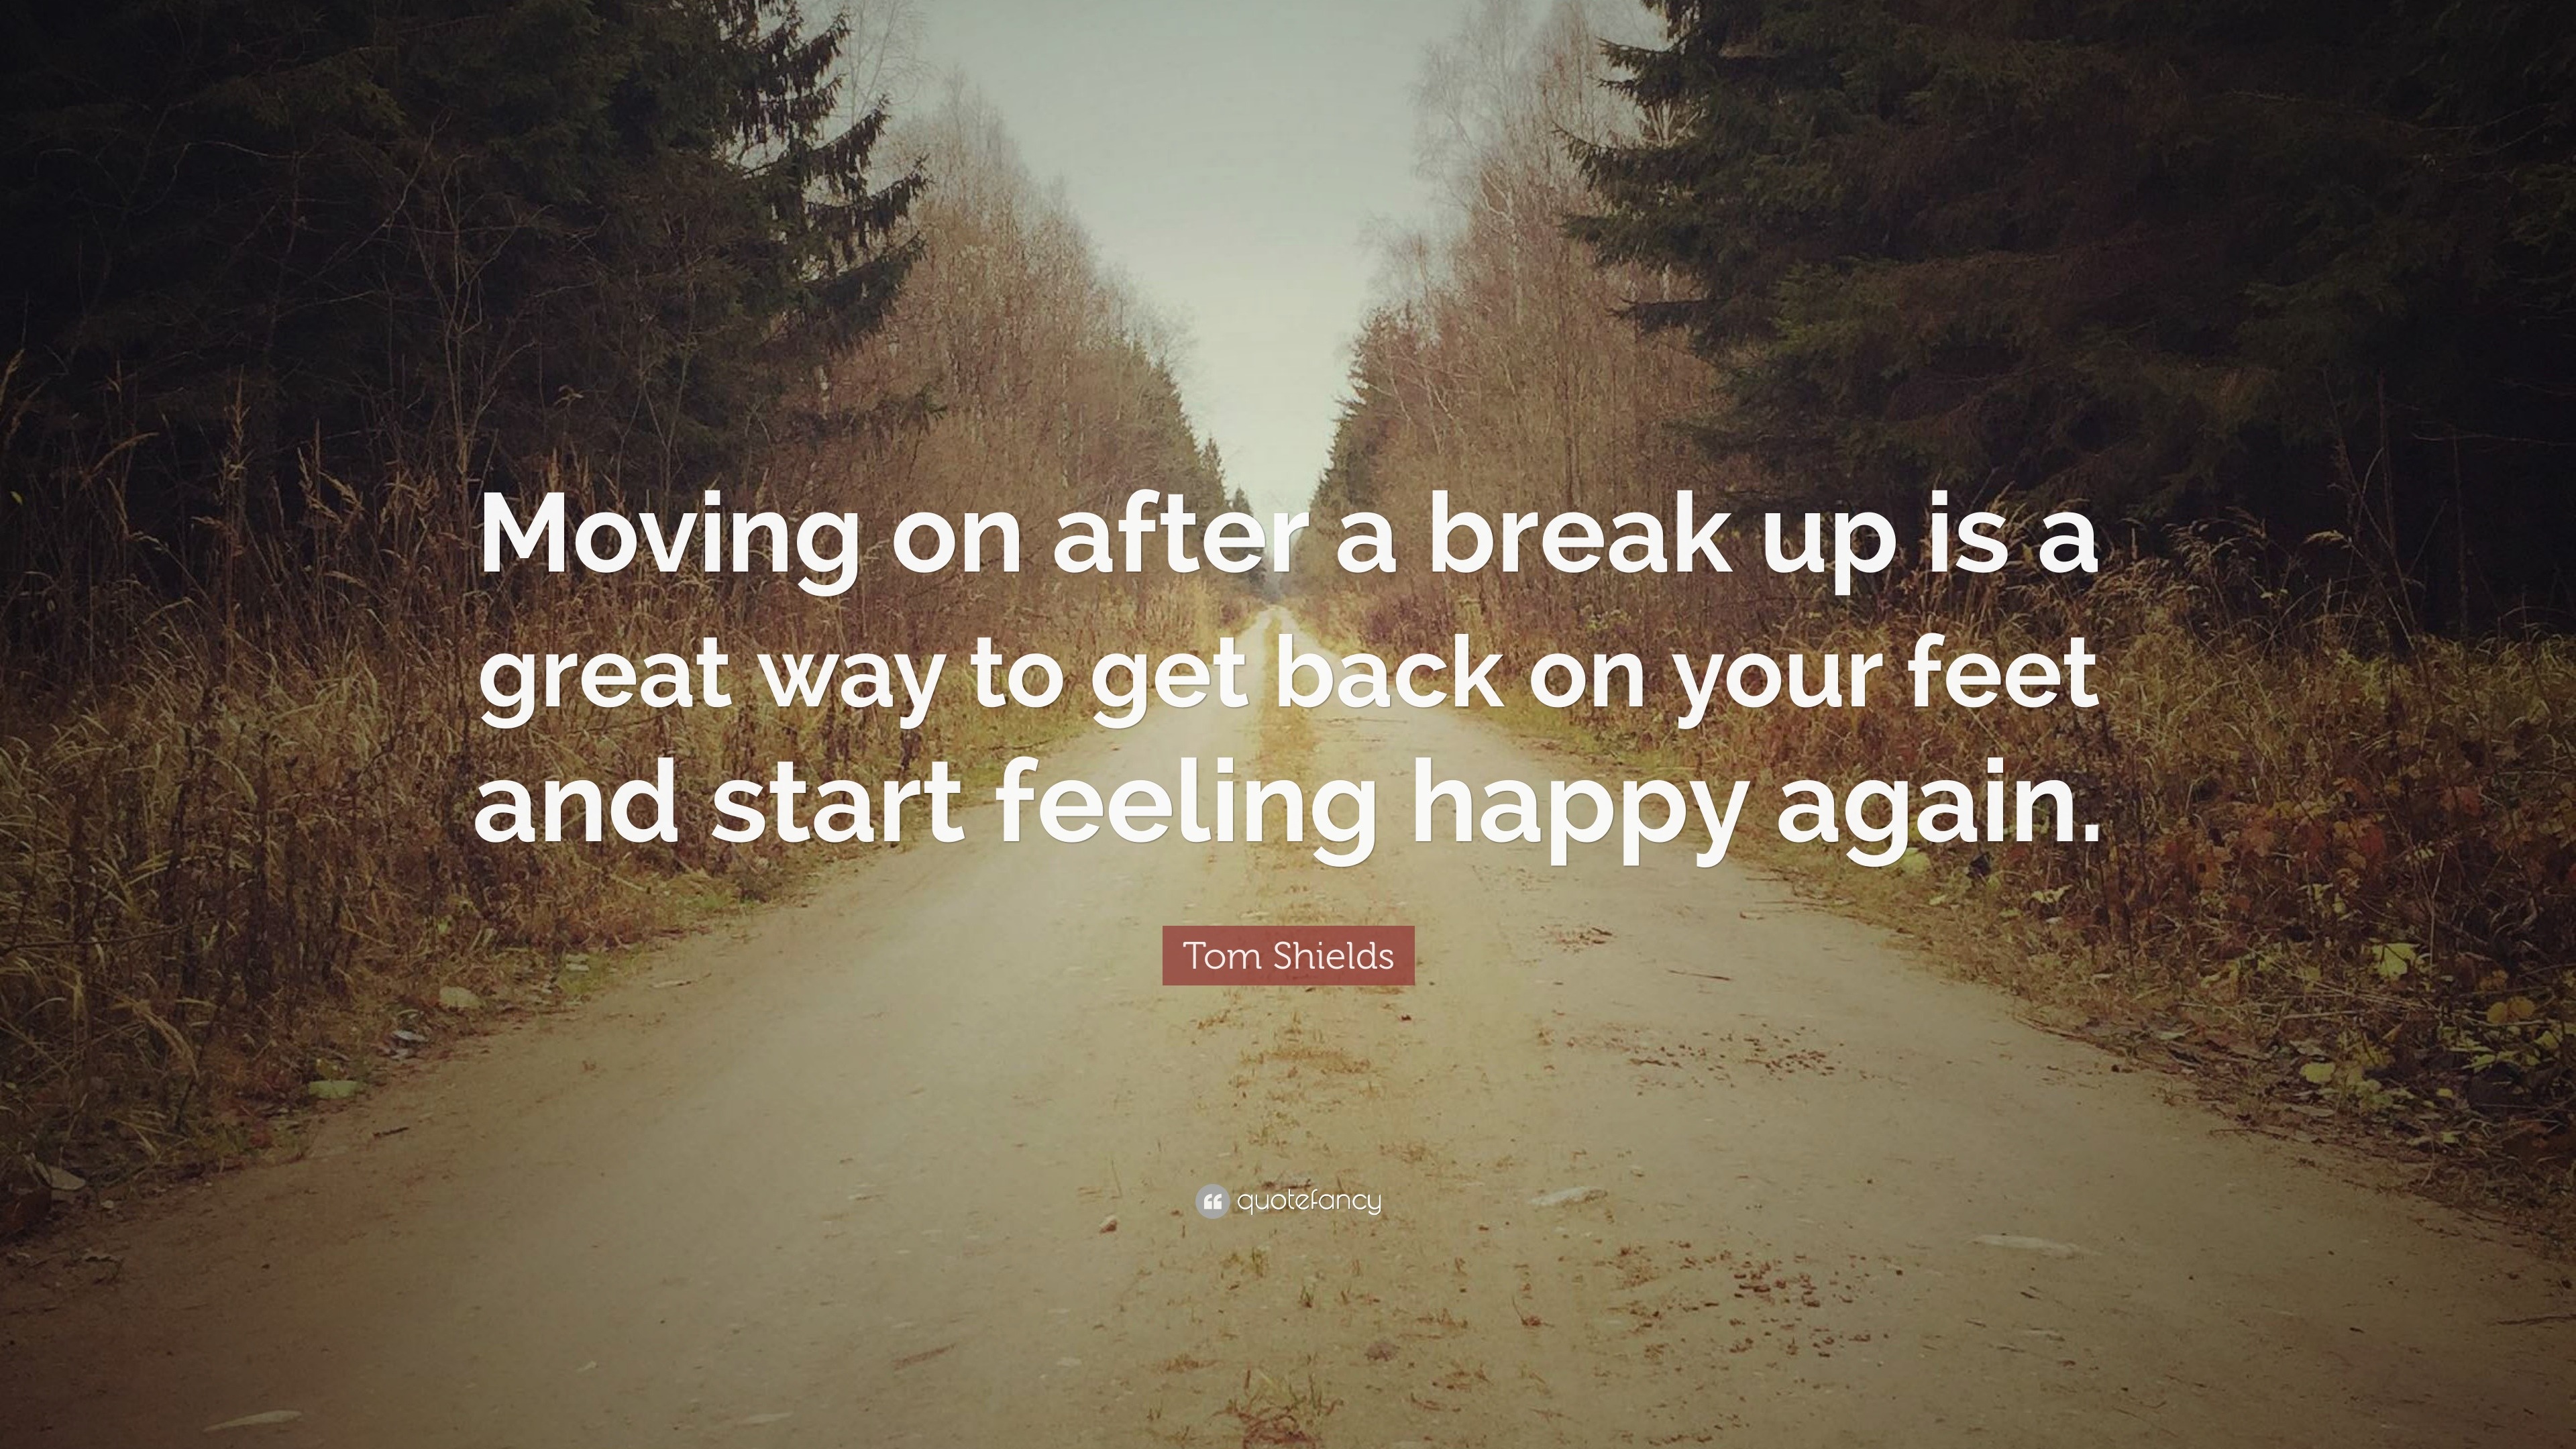 Tom Shields Quote: “Moving on after a break up is a great way to get